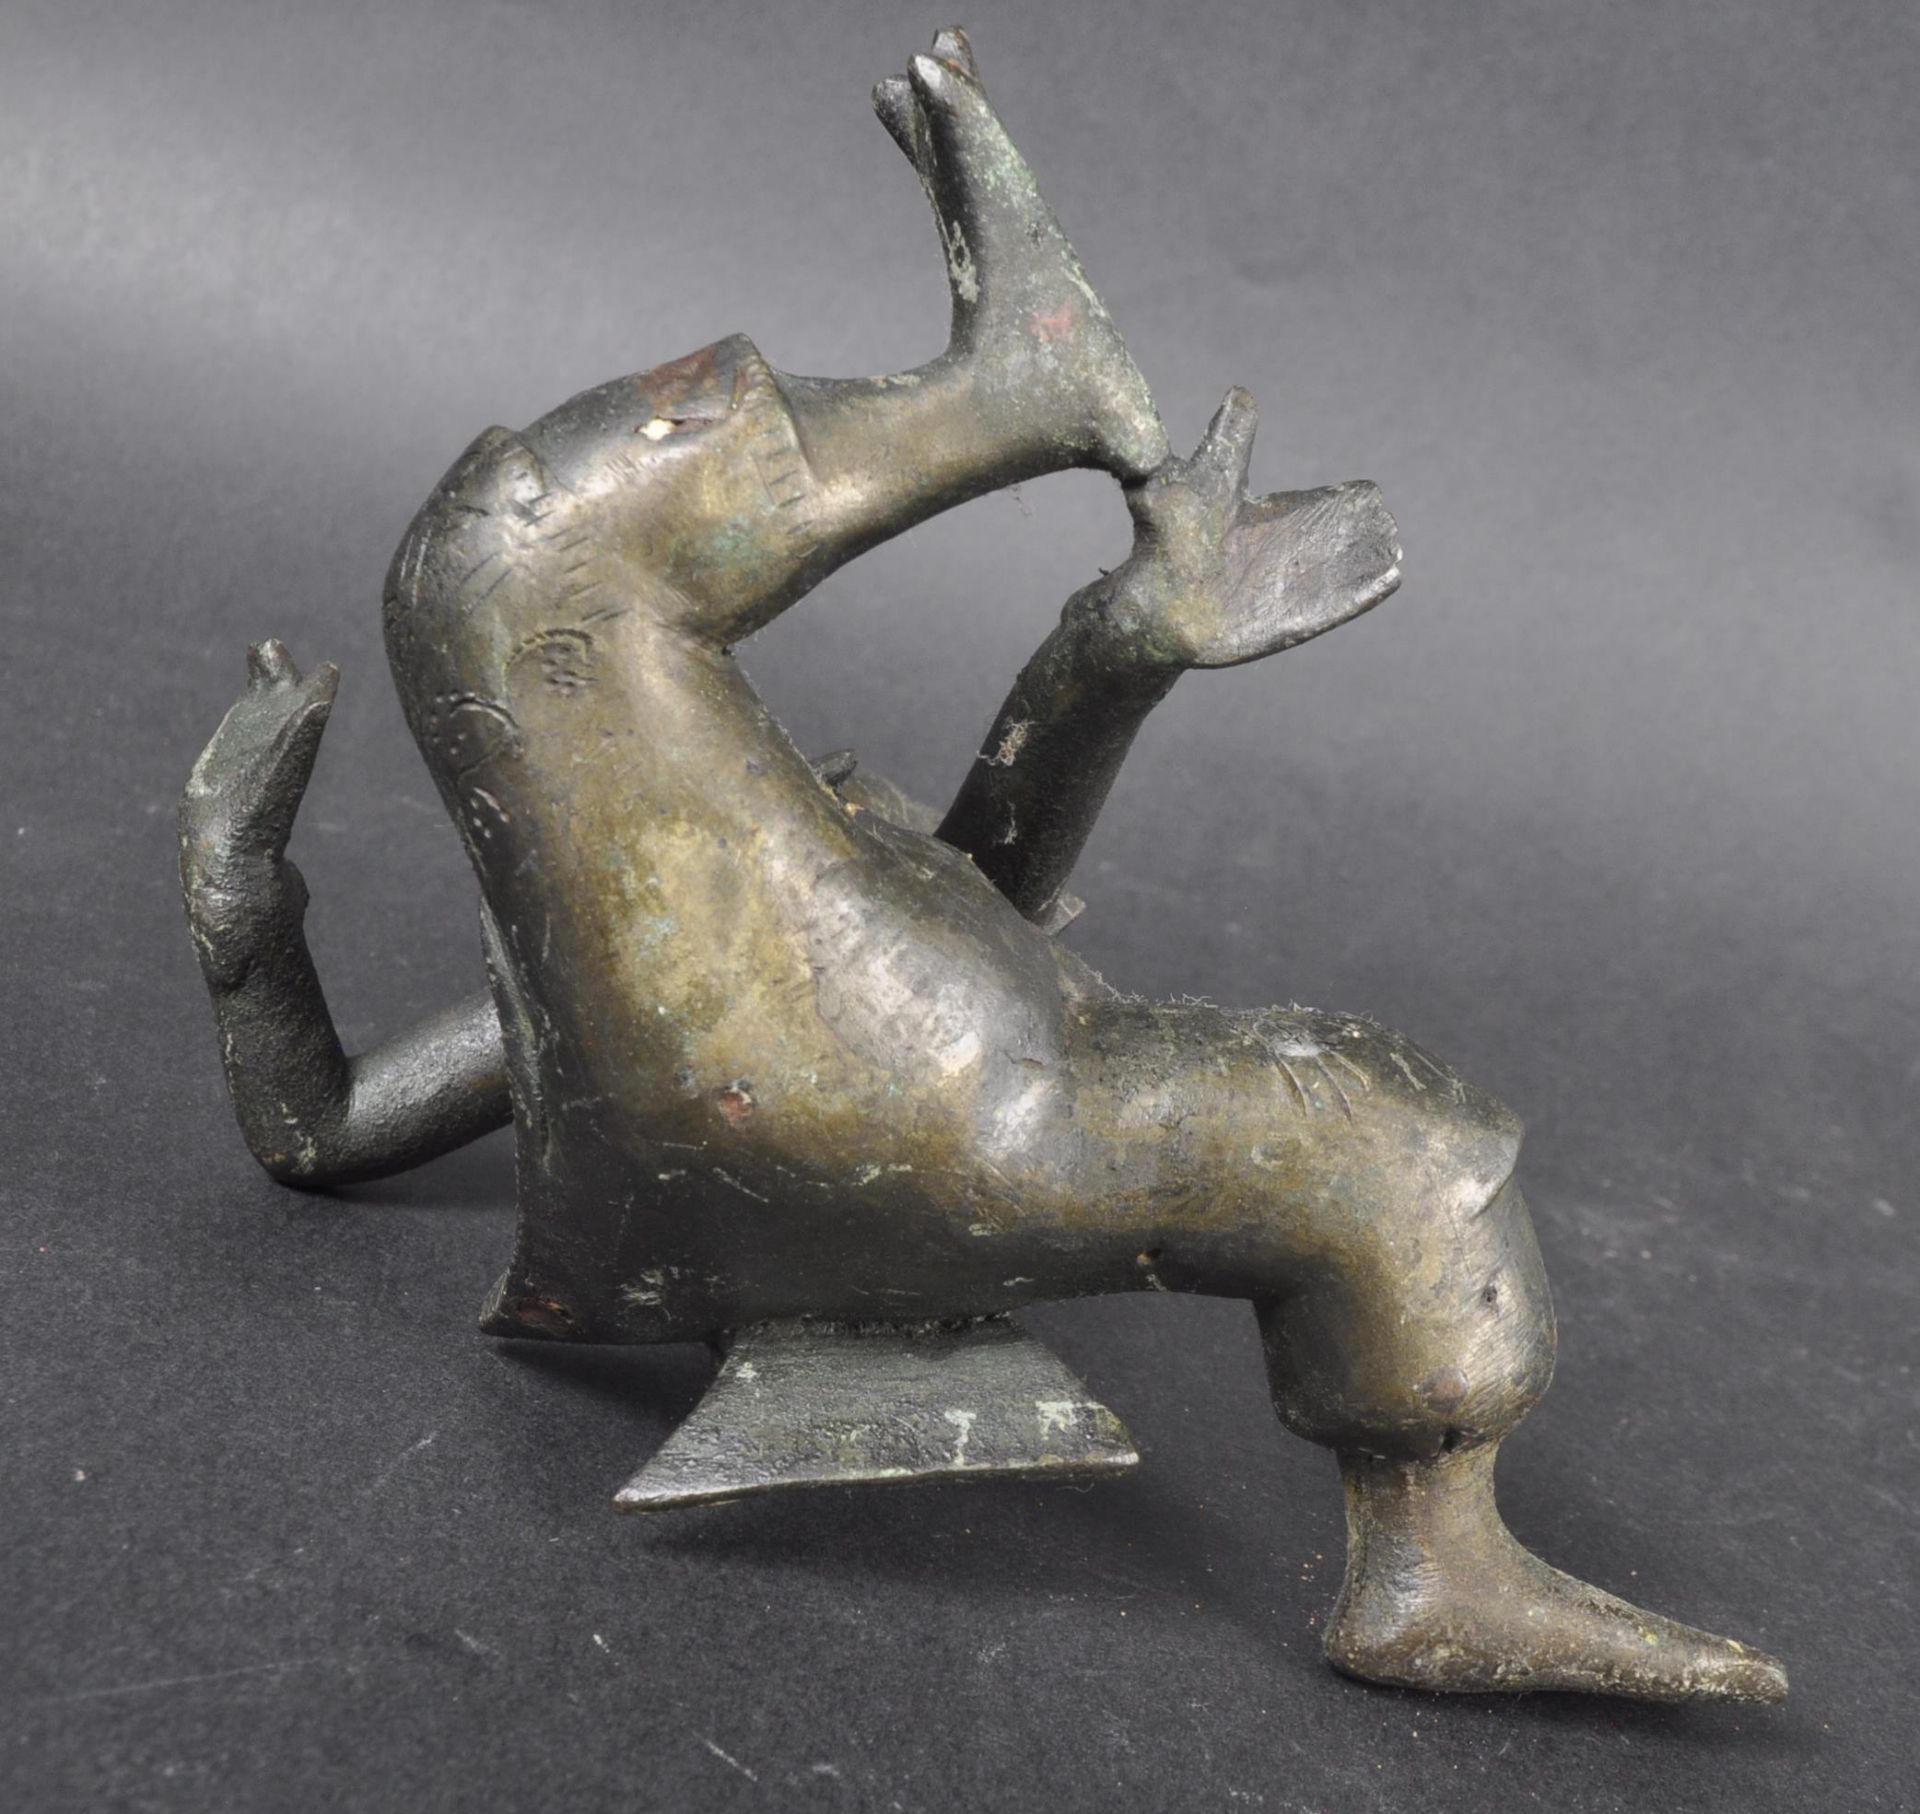 EARLY 20TH CENTURY INDIAN BRONZE FIGURINE - Image 6 of 8